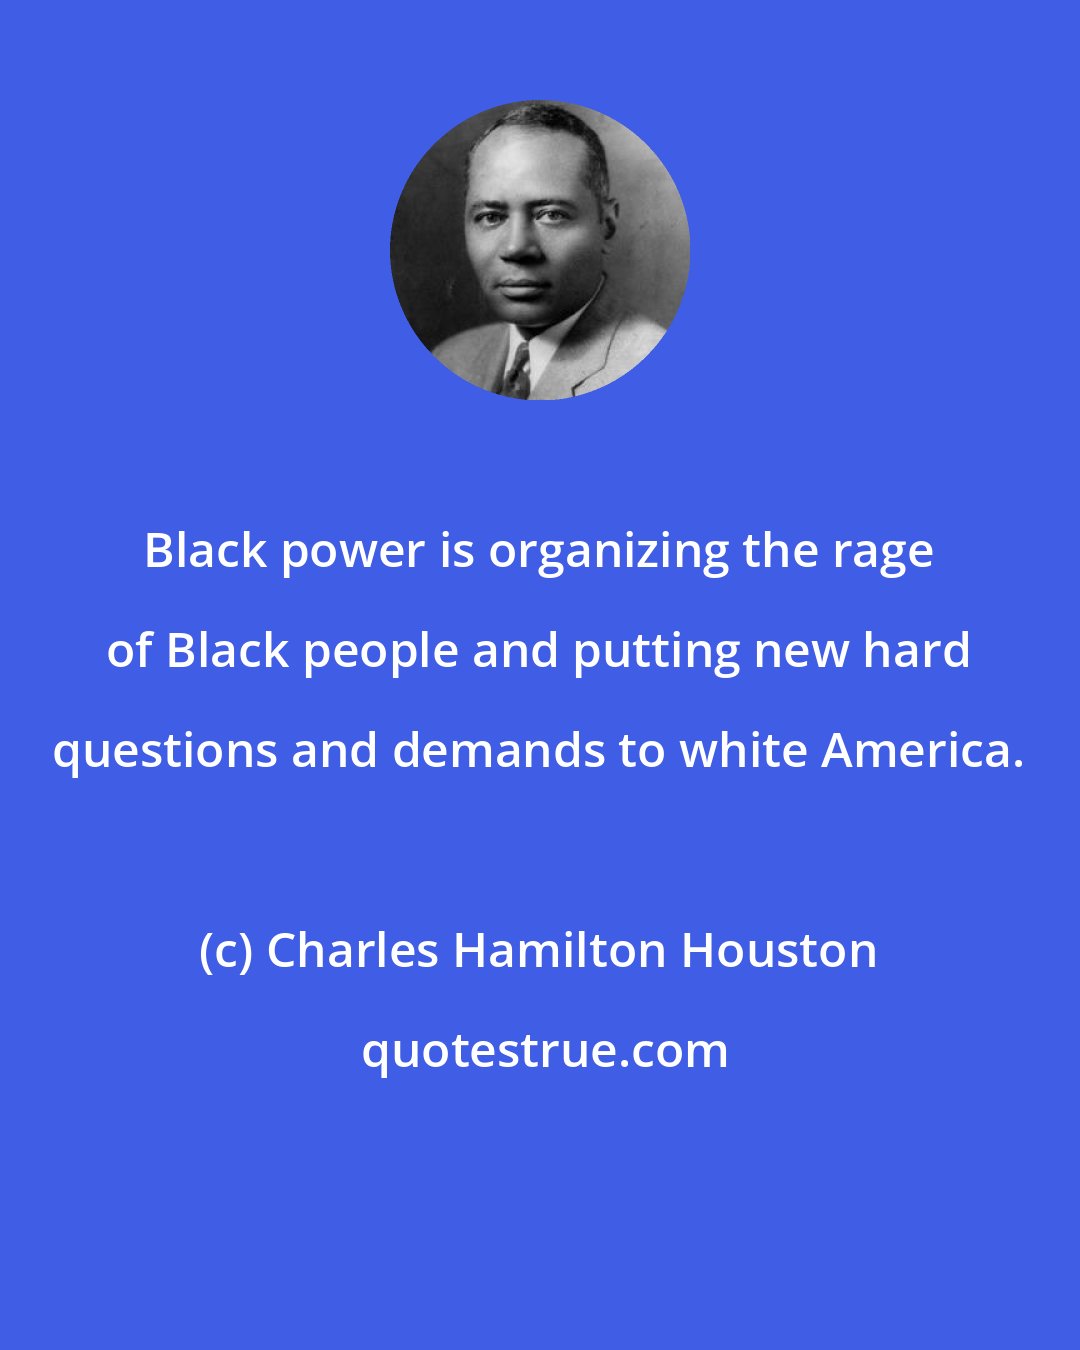 Charles Hamilton Houston: Black power is organizing the rage of Black people and putting new hard questions and demands to white America.